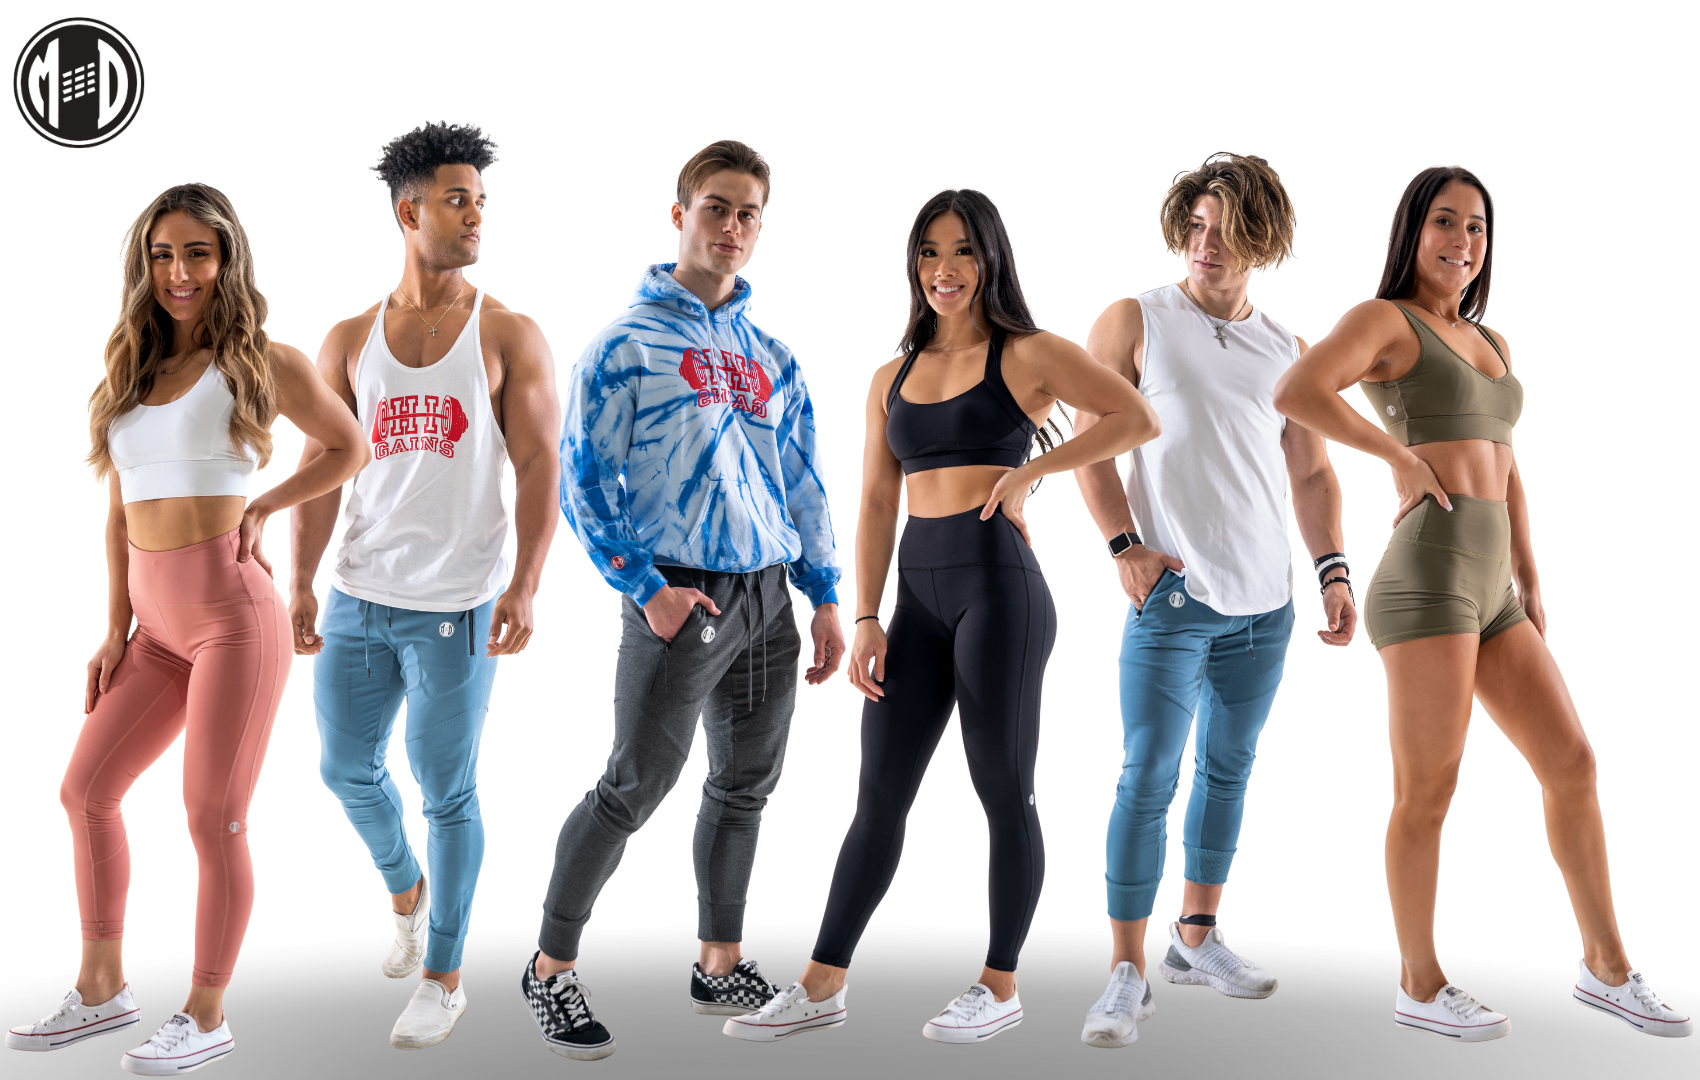 Fitness Apparel - Workout Clothes - Gym Wear - Mikey D Apparel